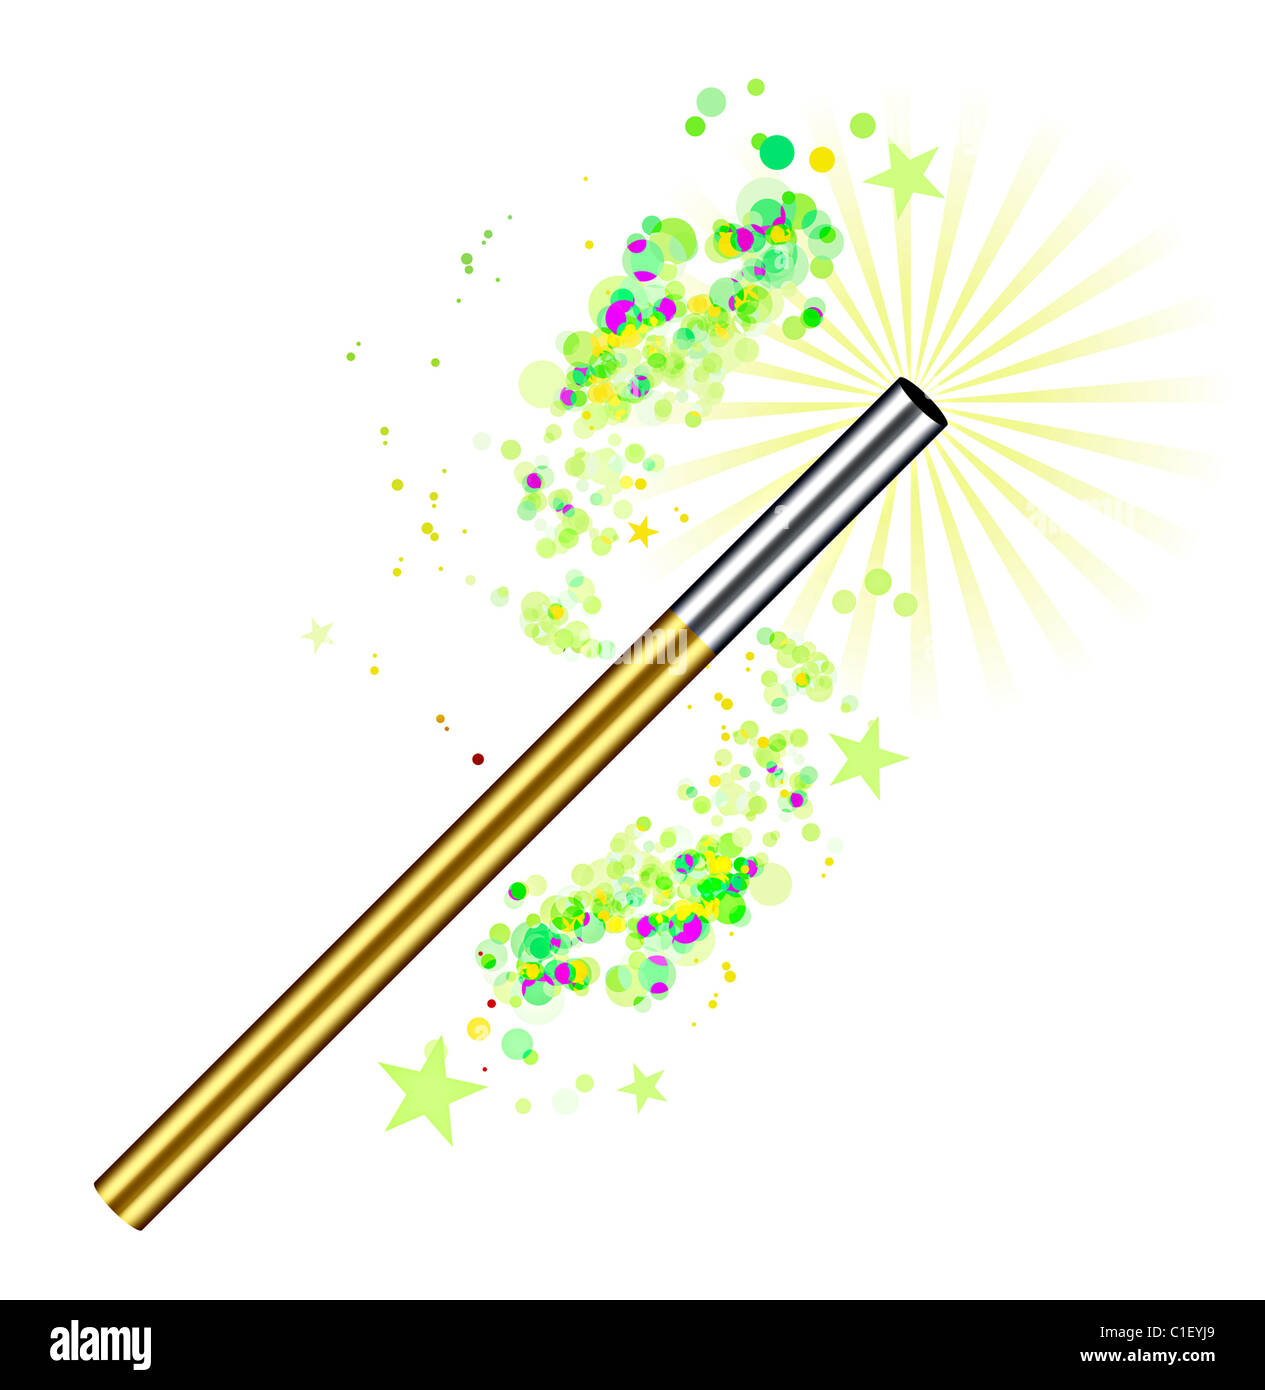 Beautiful vector magic background with wand Stock Photo